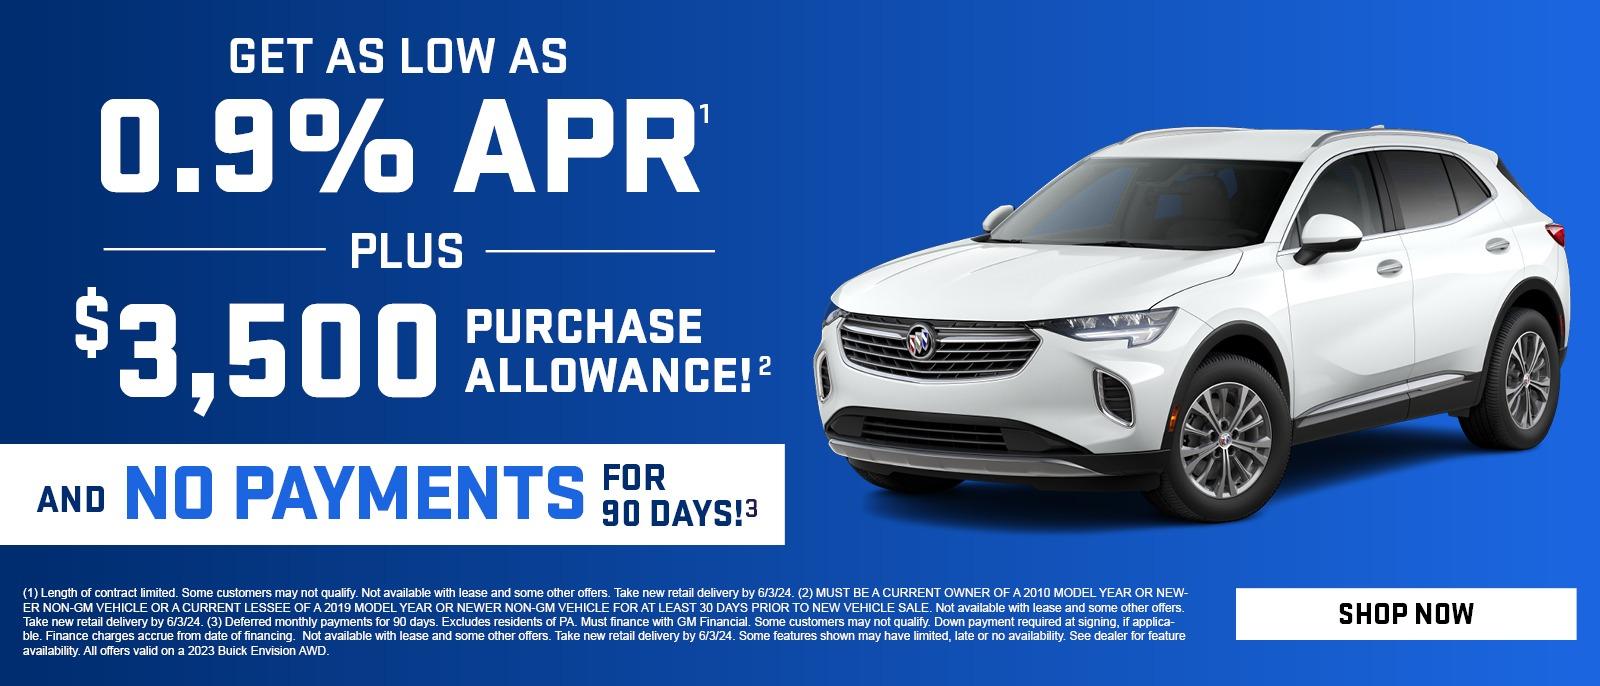 Get as low as
0.9% APR
Plus
$3,500 purchase allowance!
And No payments for 90 days!